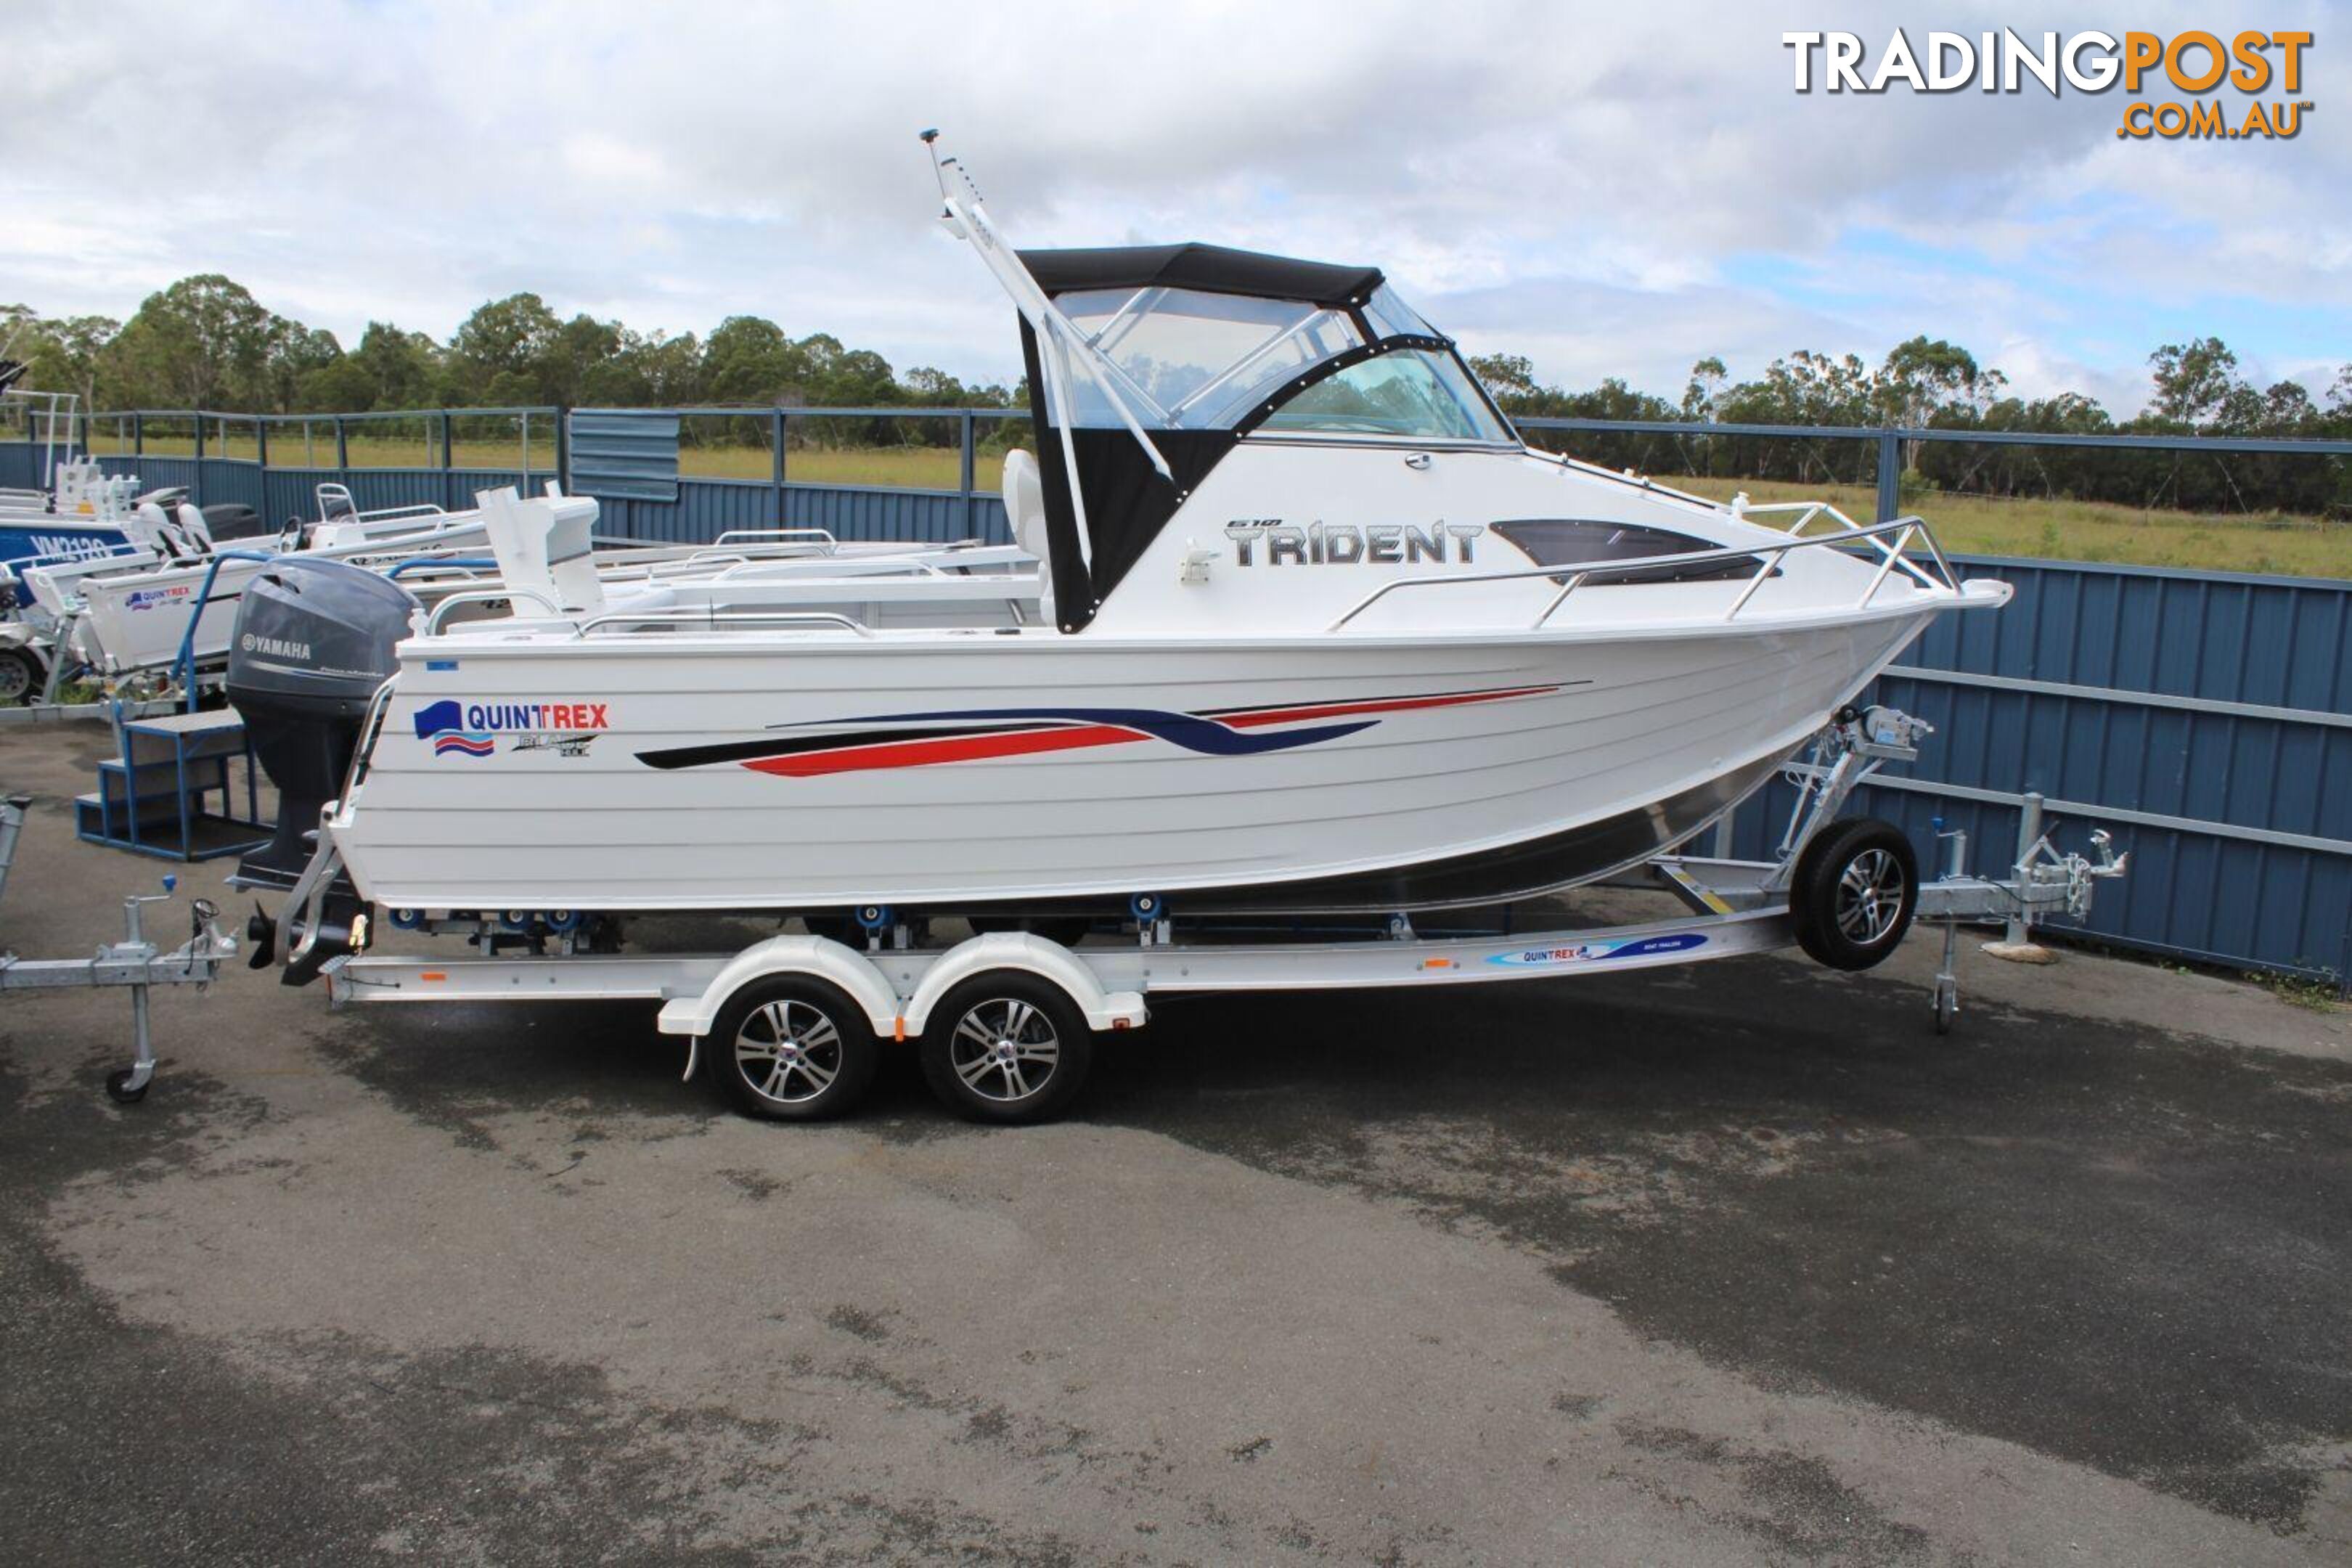 Quintrex 610 Trident + Yamaha F150hp 4-Stroke - Pack 3 for sale online prices